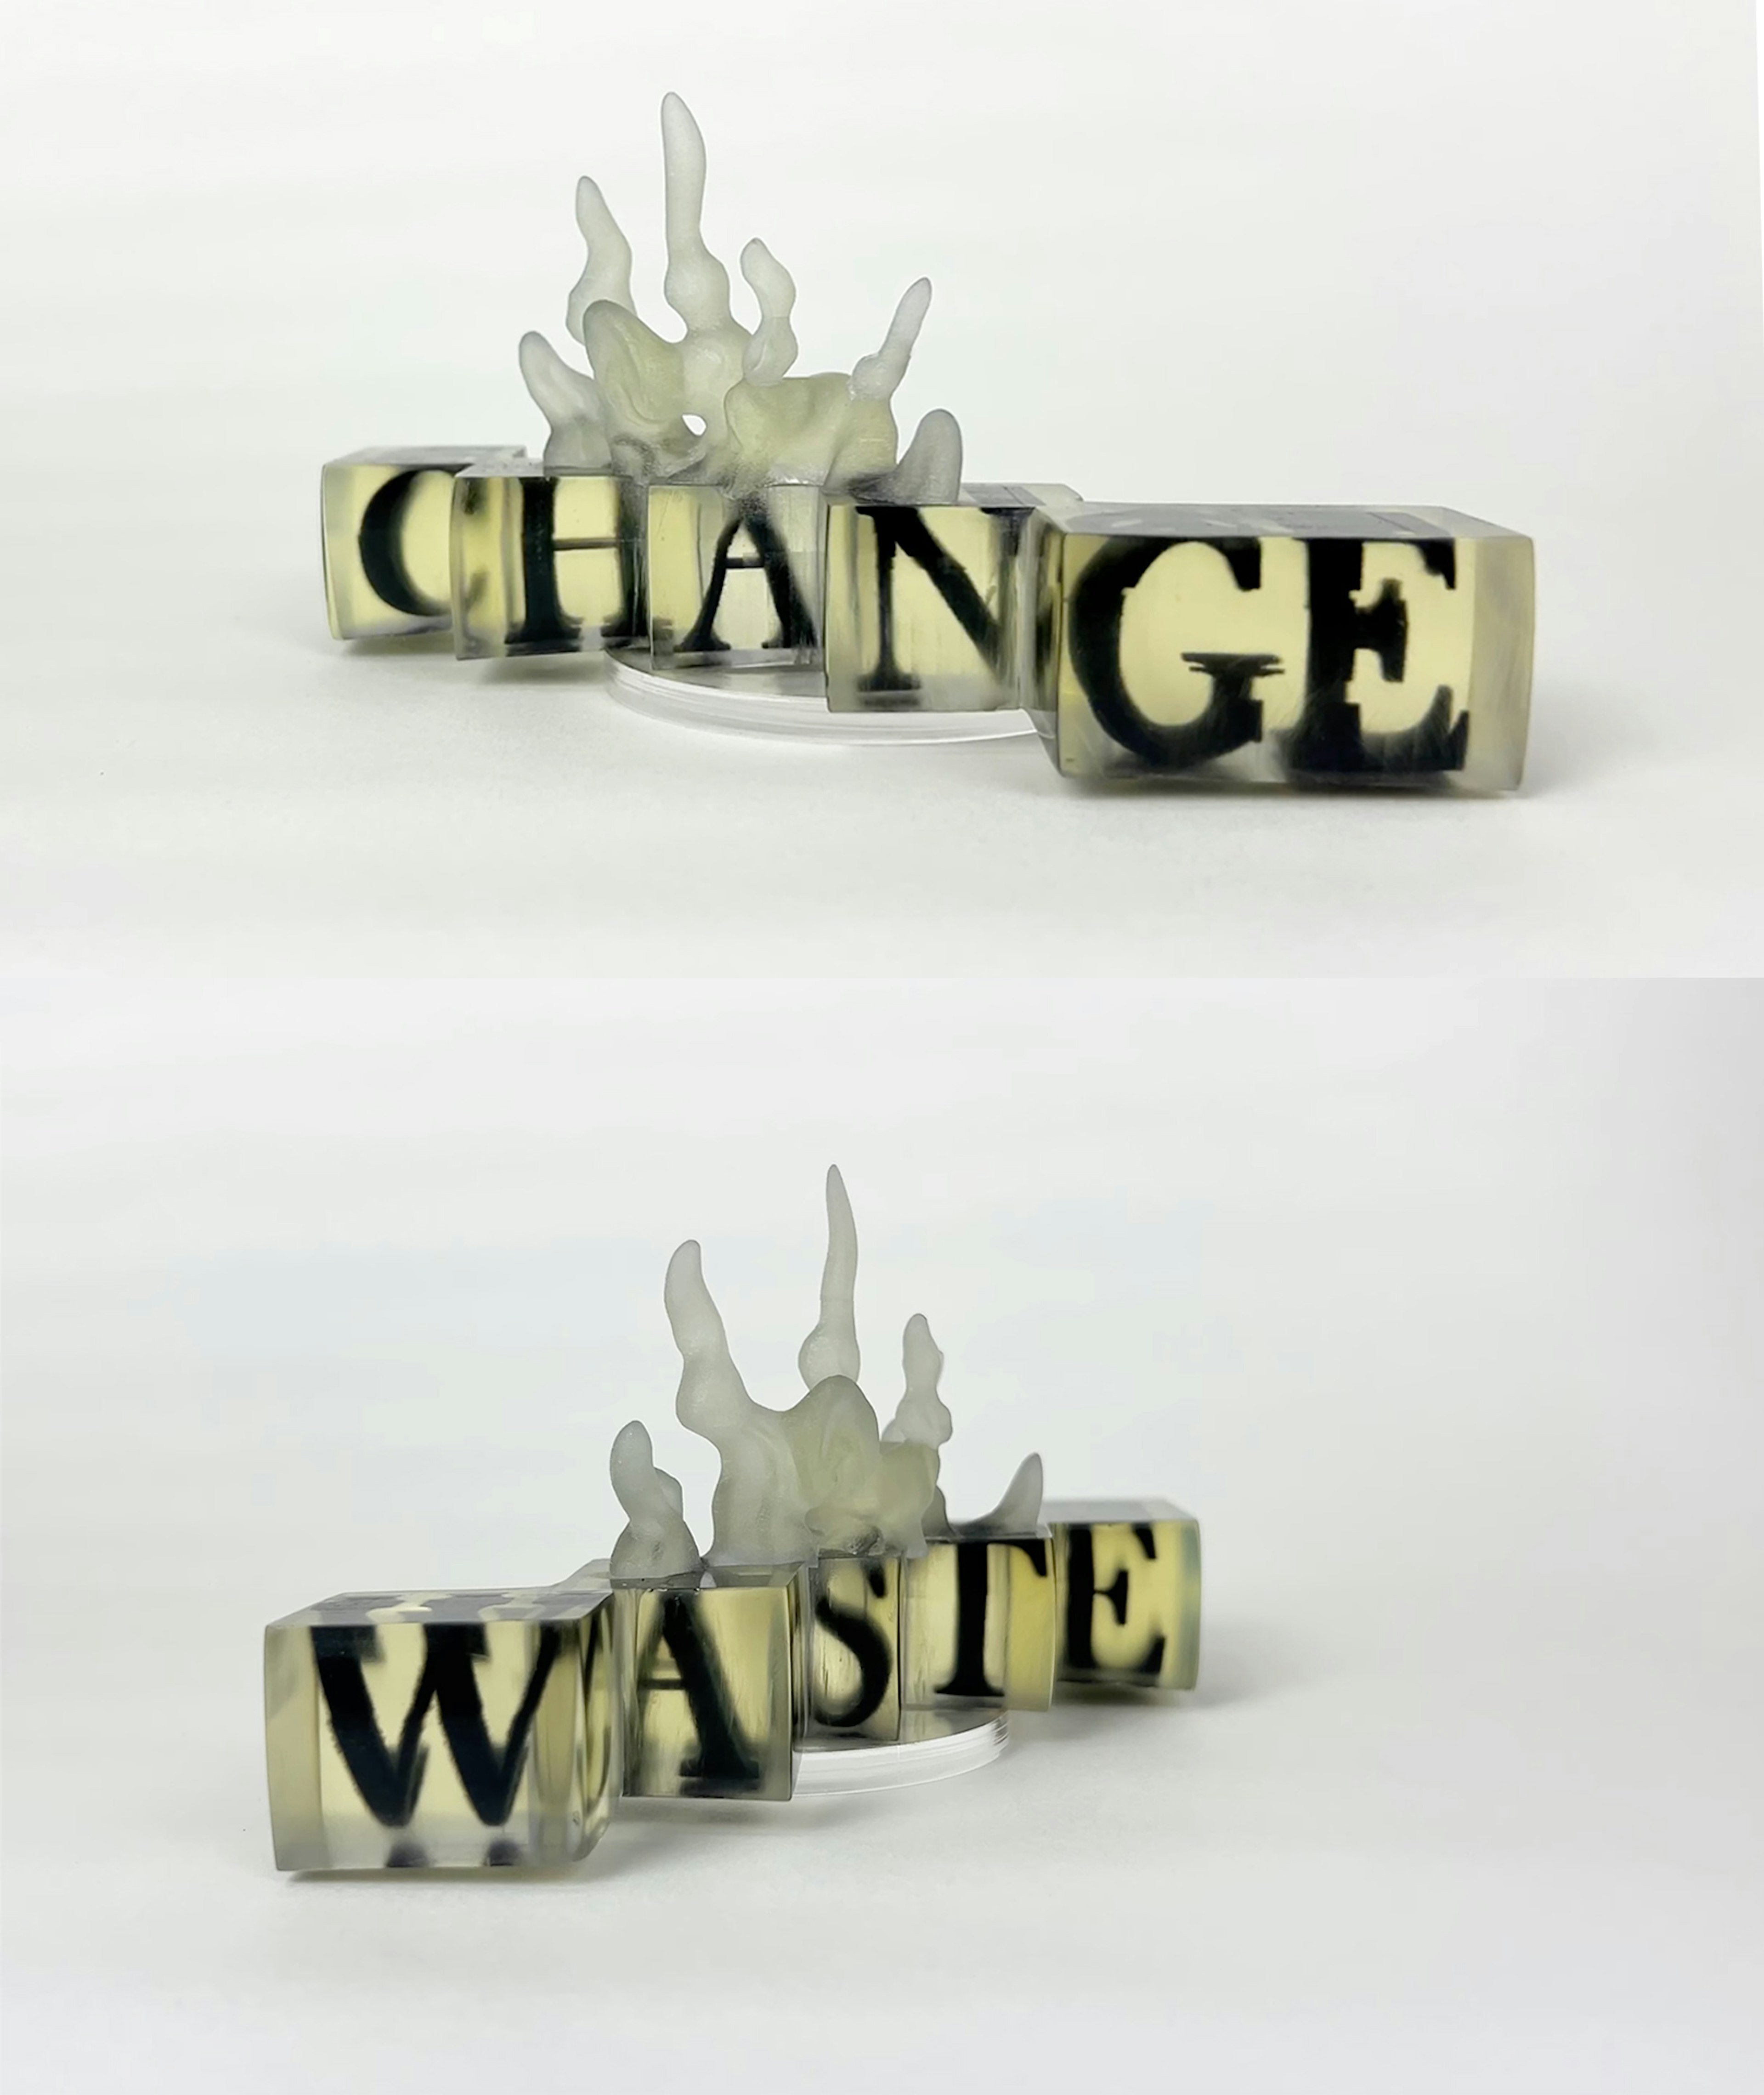 My 3D print ‘Perspective Change’ – by changing the perspective through which it is viewed, the viewer can transform ‘Waste’ into ‘Change’. 